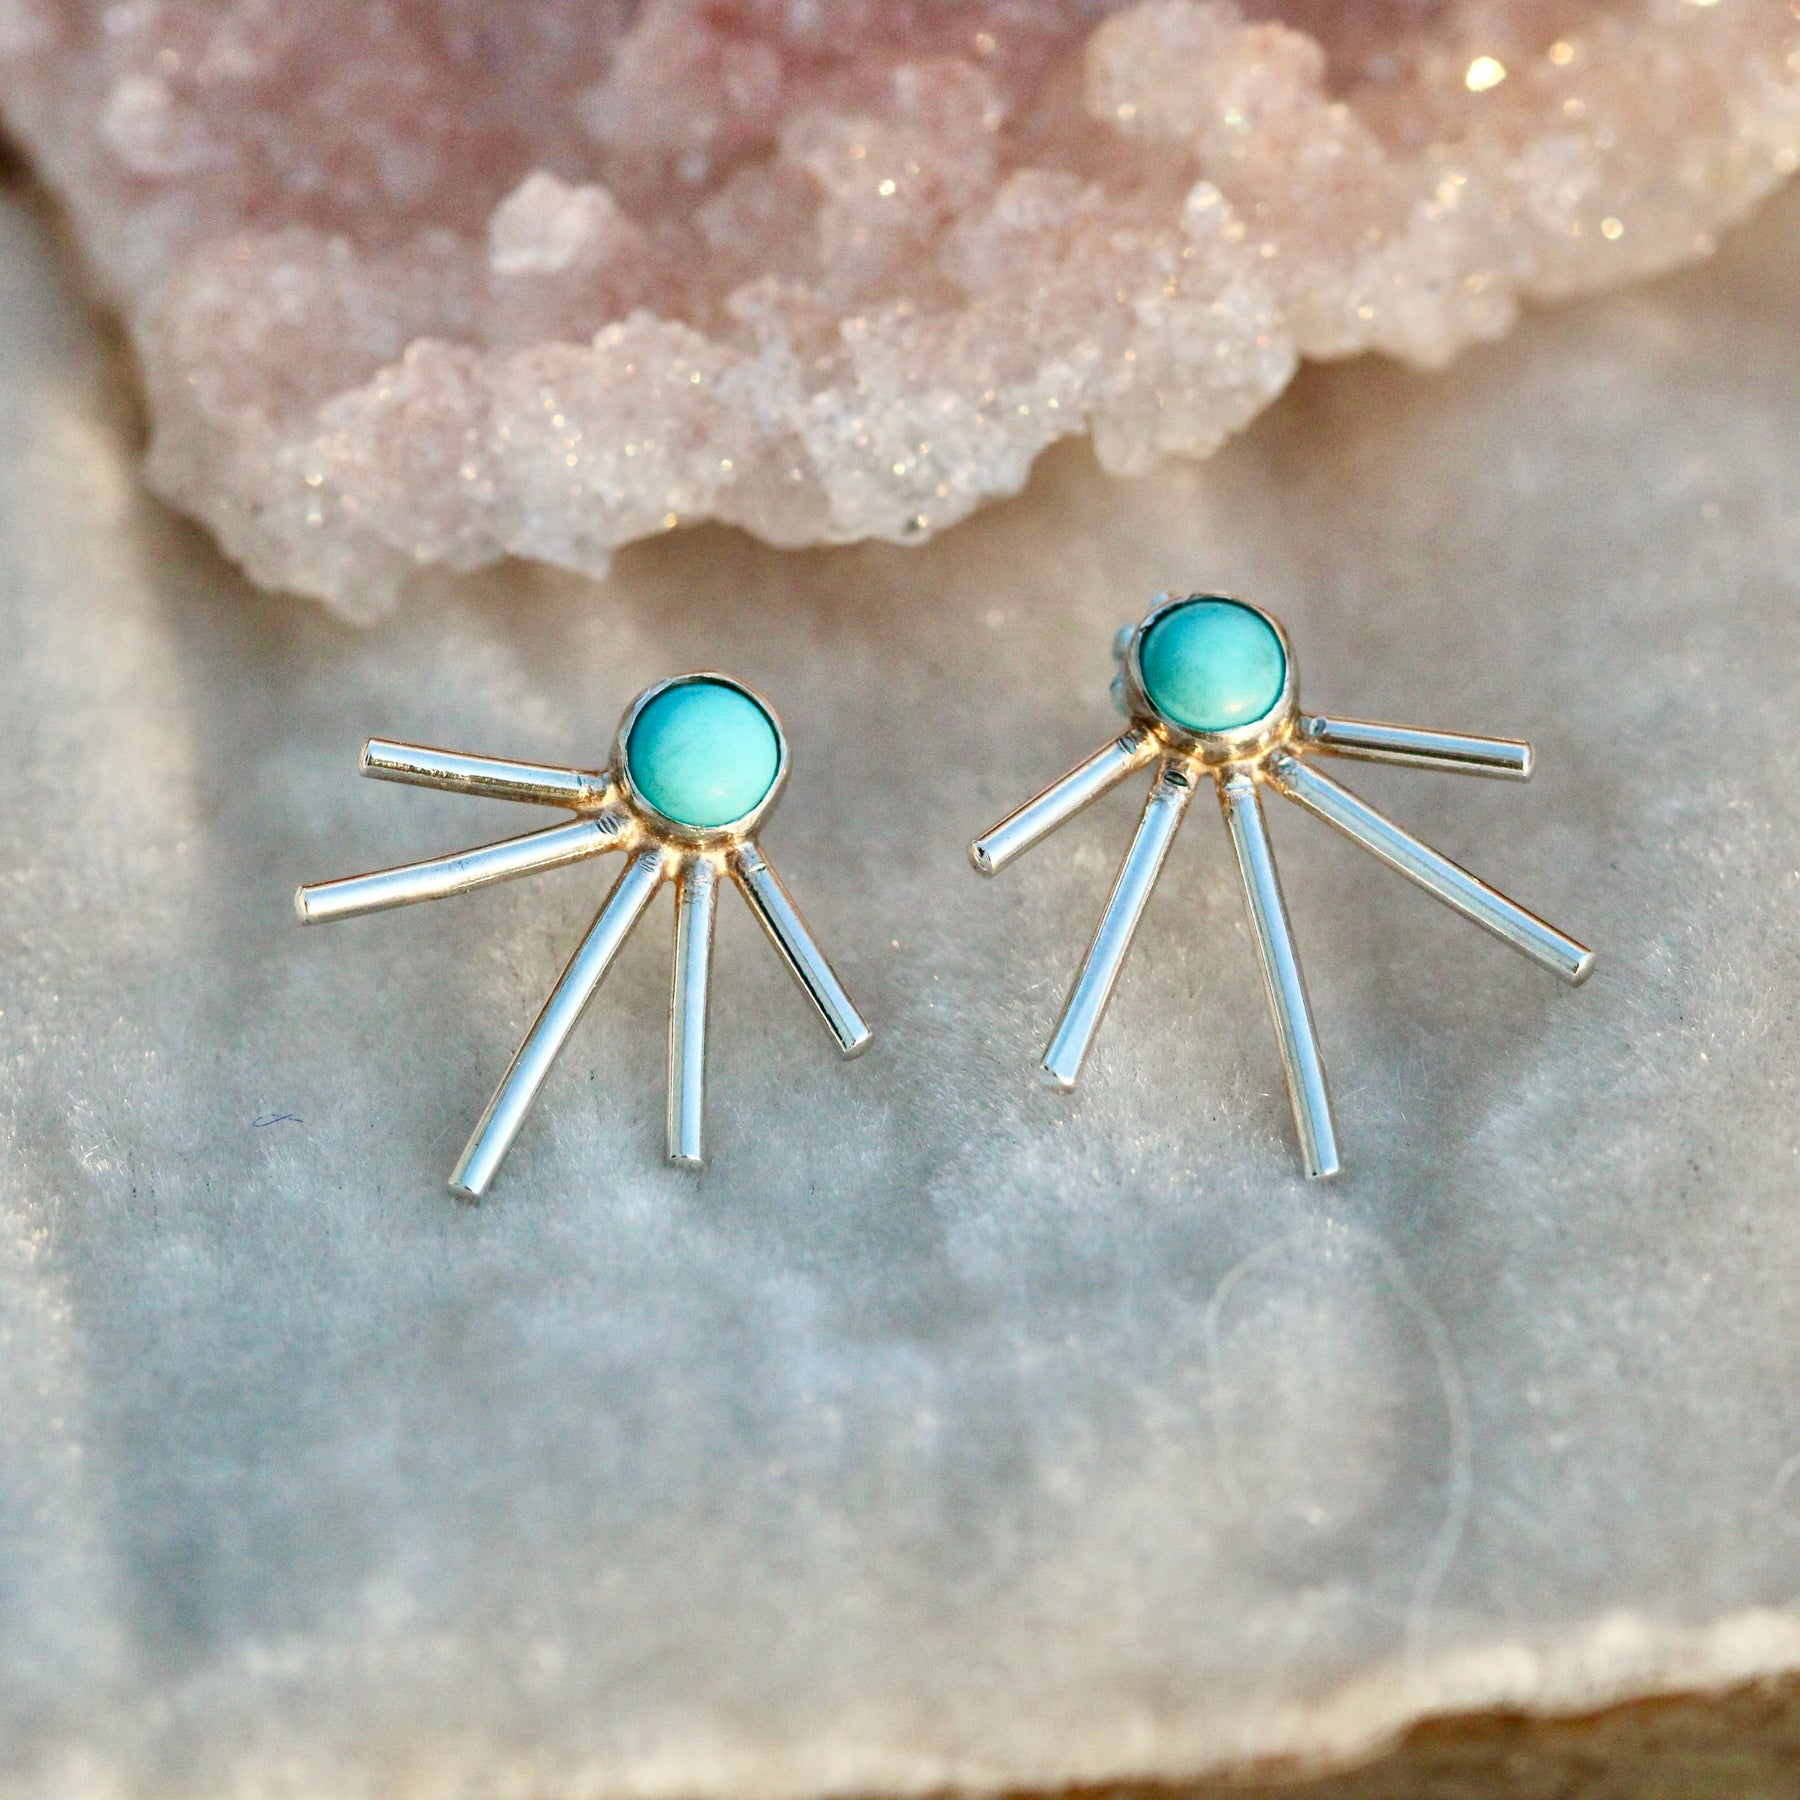 Starburst earrings Turquoise and sterling silver